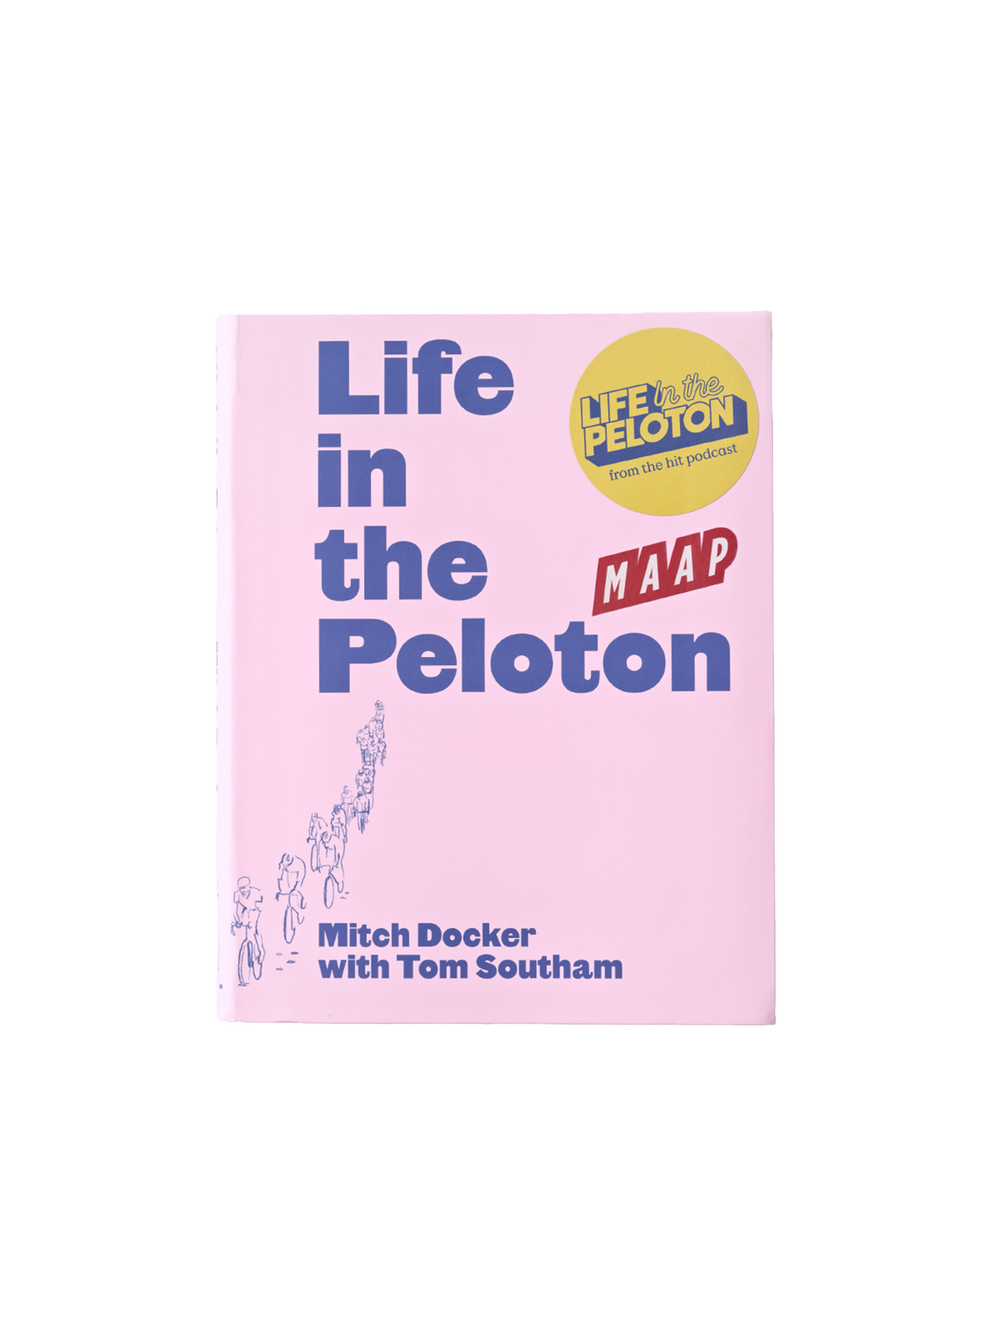 Product Image for Life in the Peloton - Mitch Docker